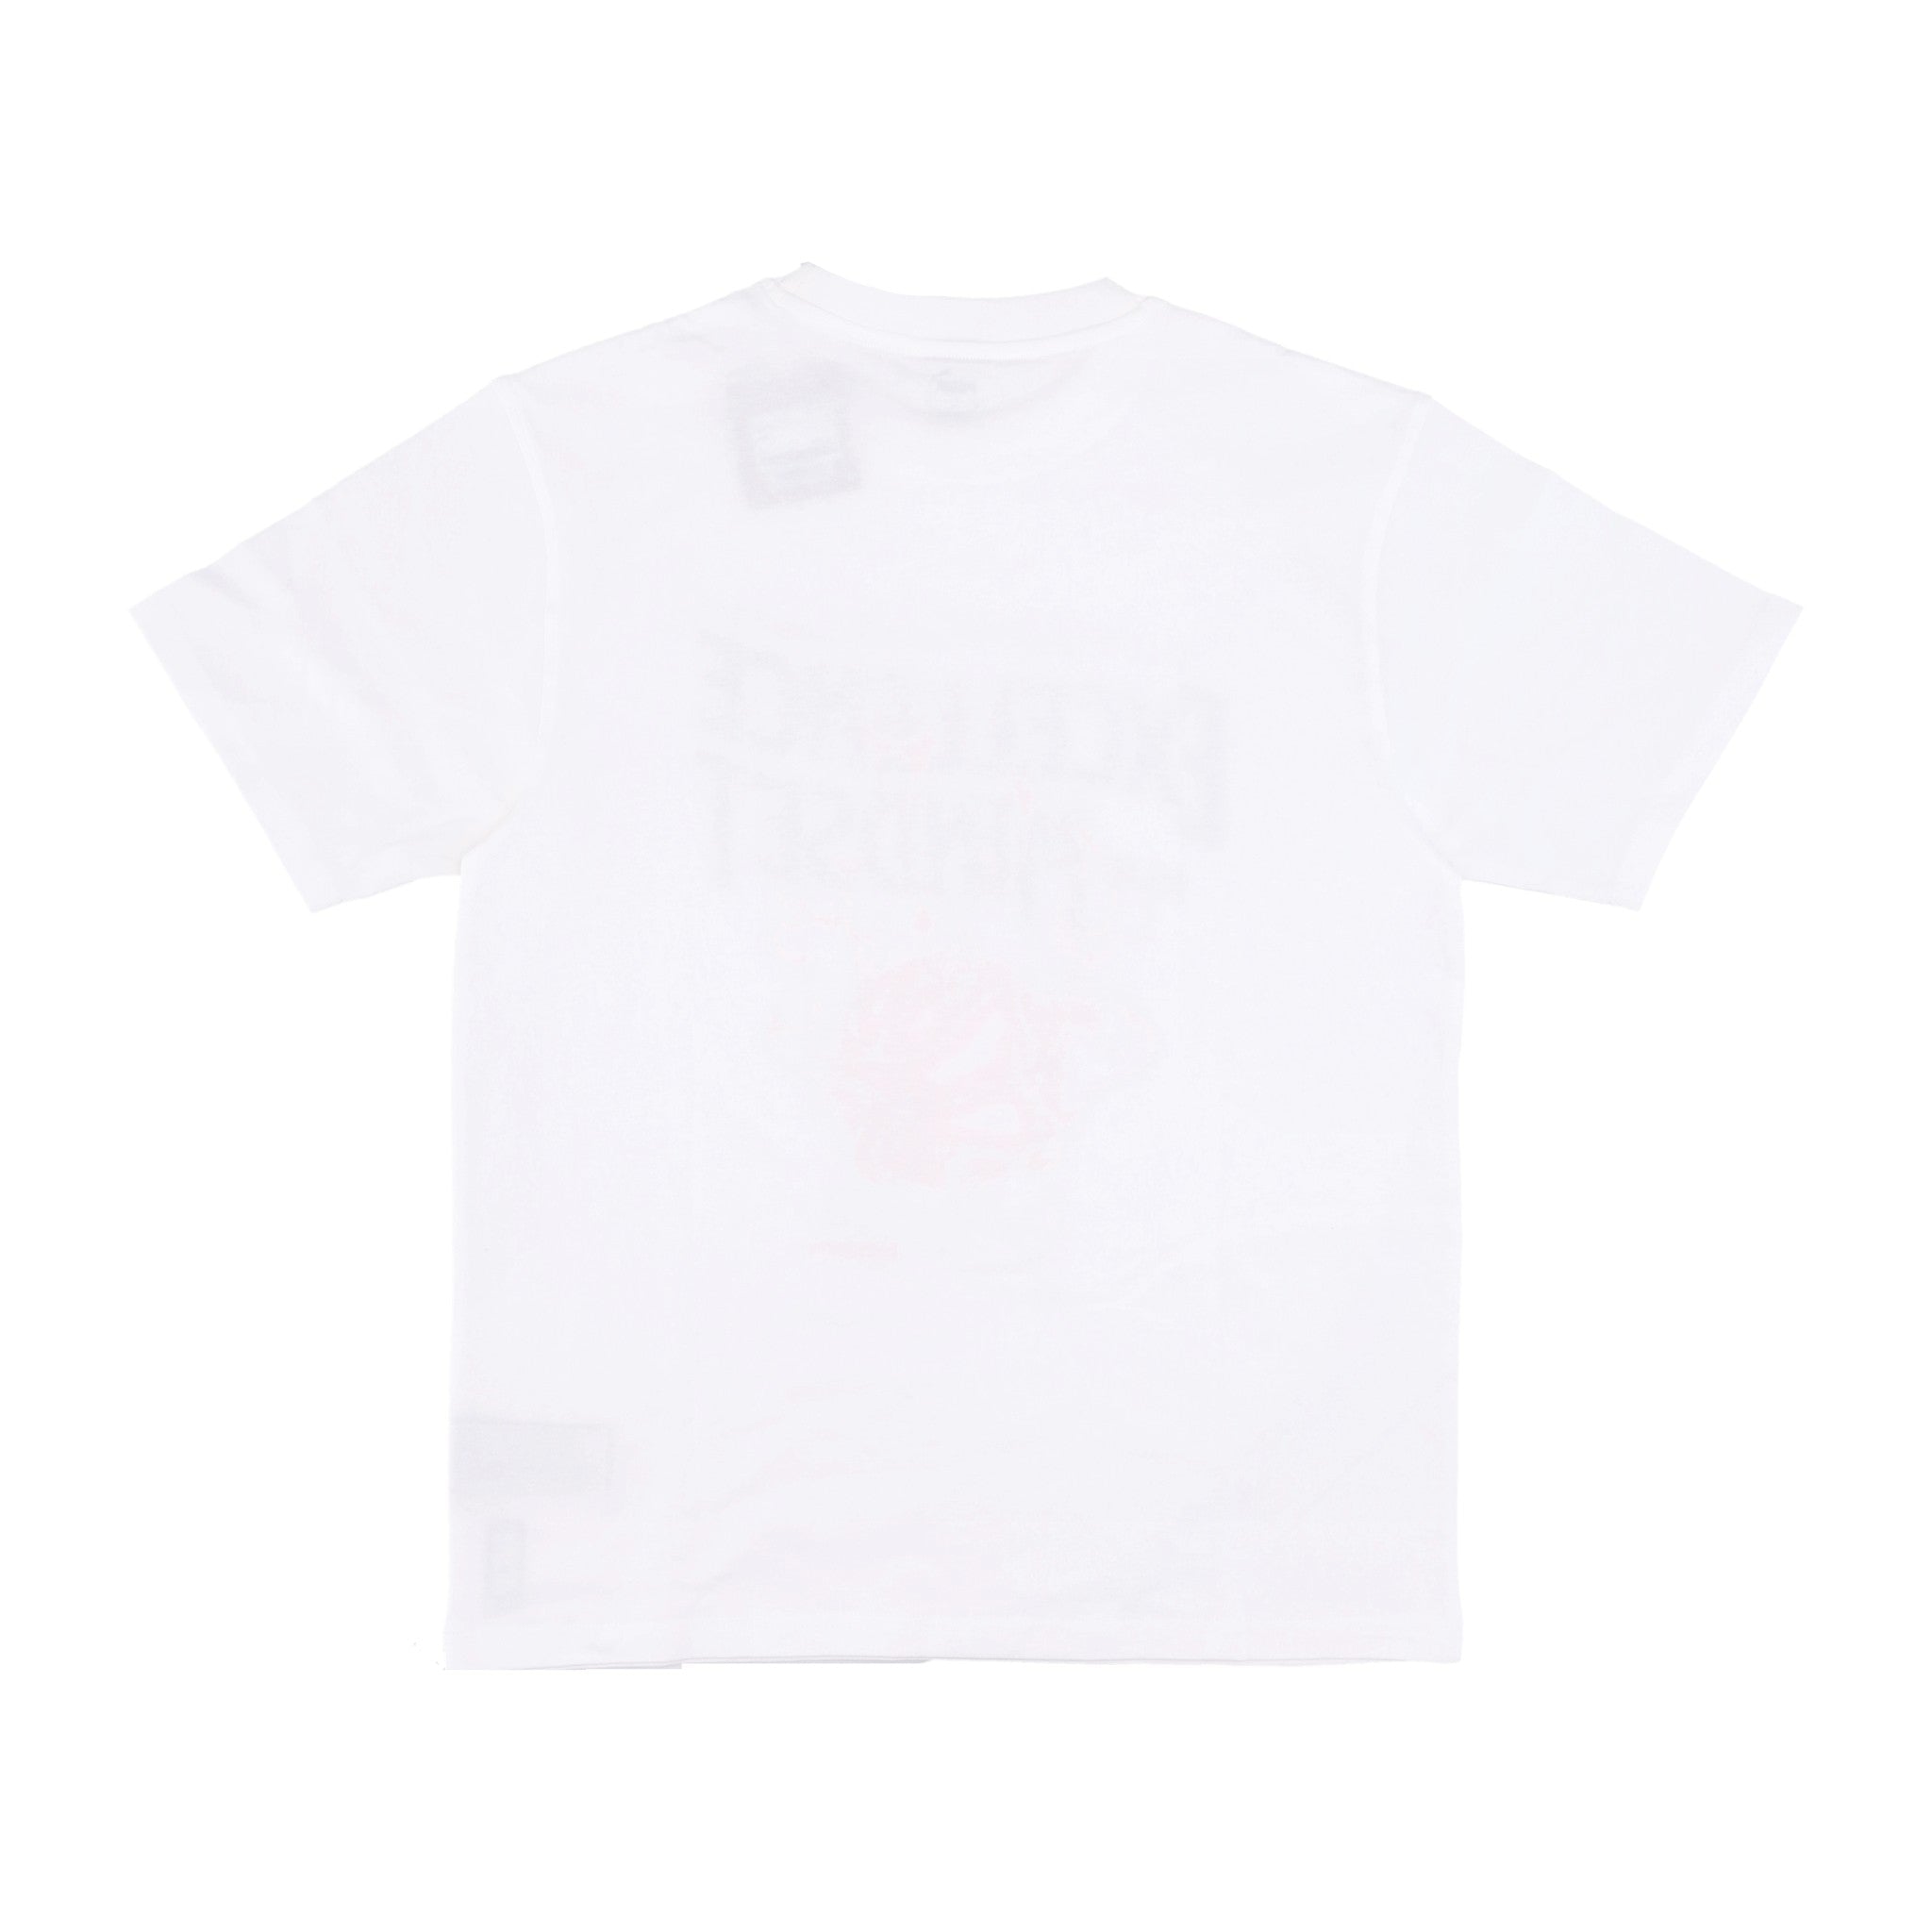 Maglietta Uomo Hoops Excellence Tee White 624754-01